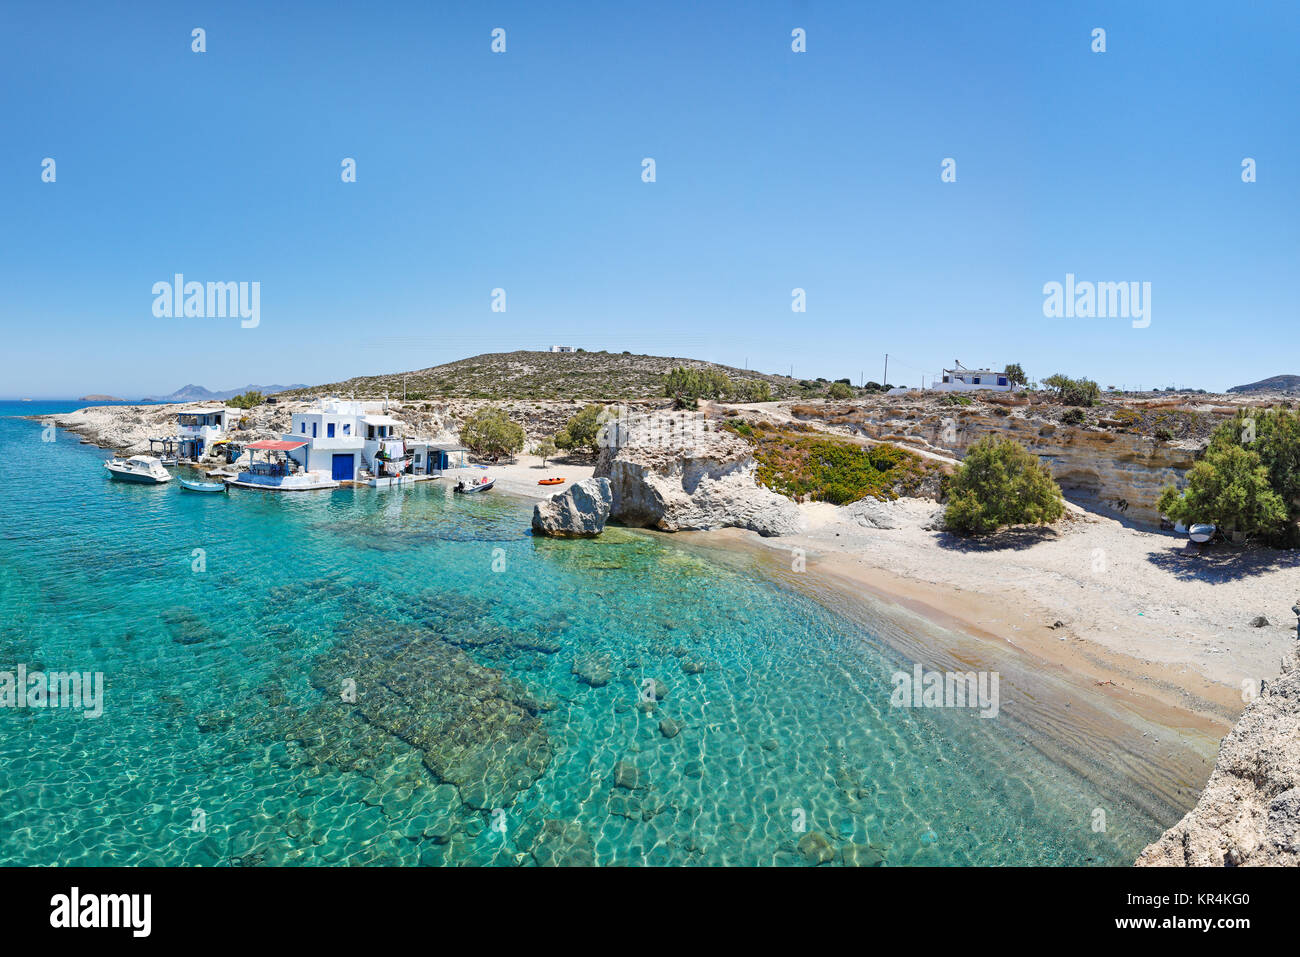 Traditional fishermen houses with the impressive boat shelters, also known as “syrmata” in Mytakas of Milos, Greece Stock Photo